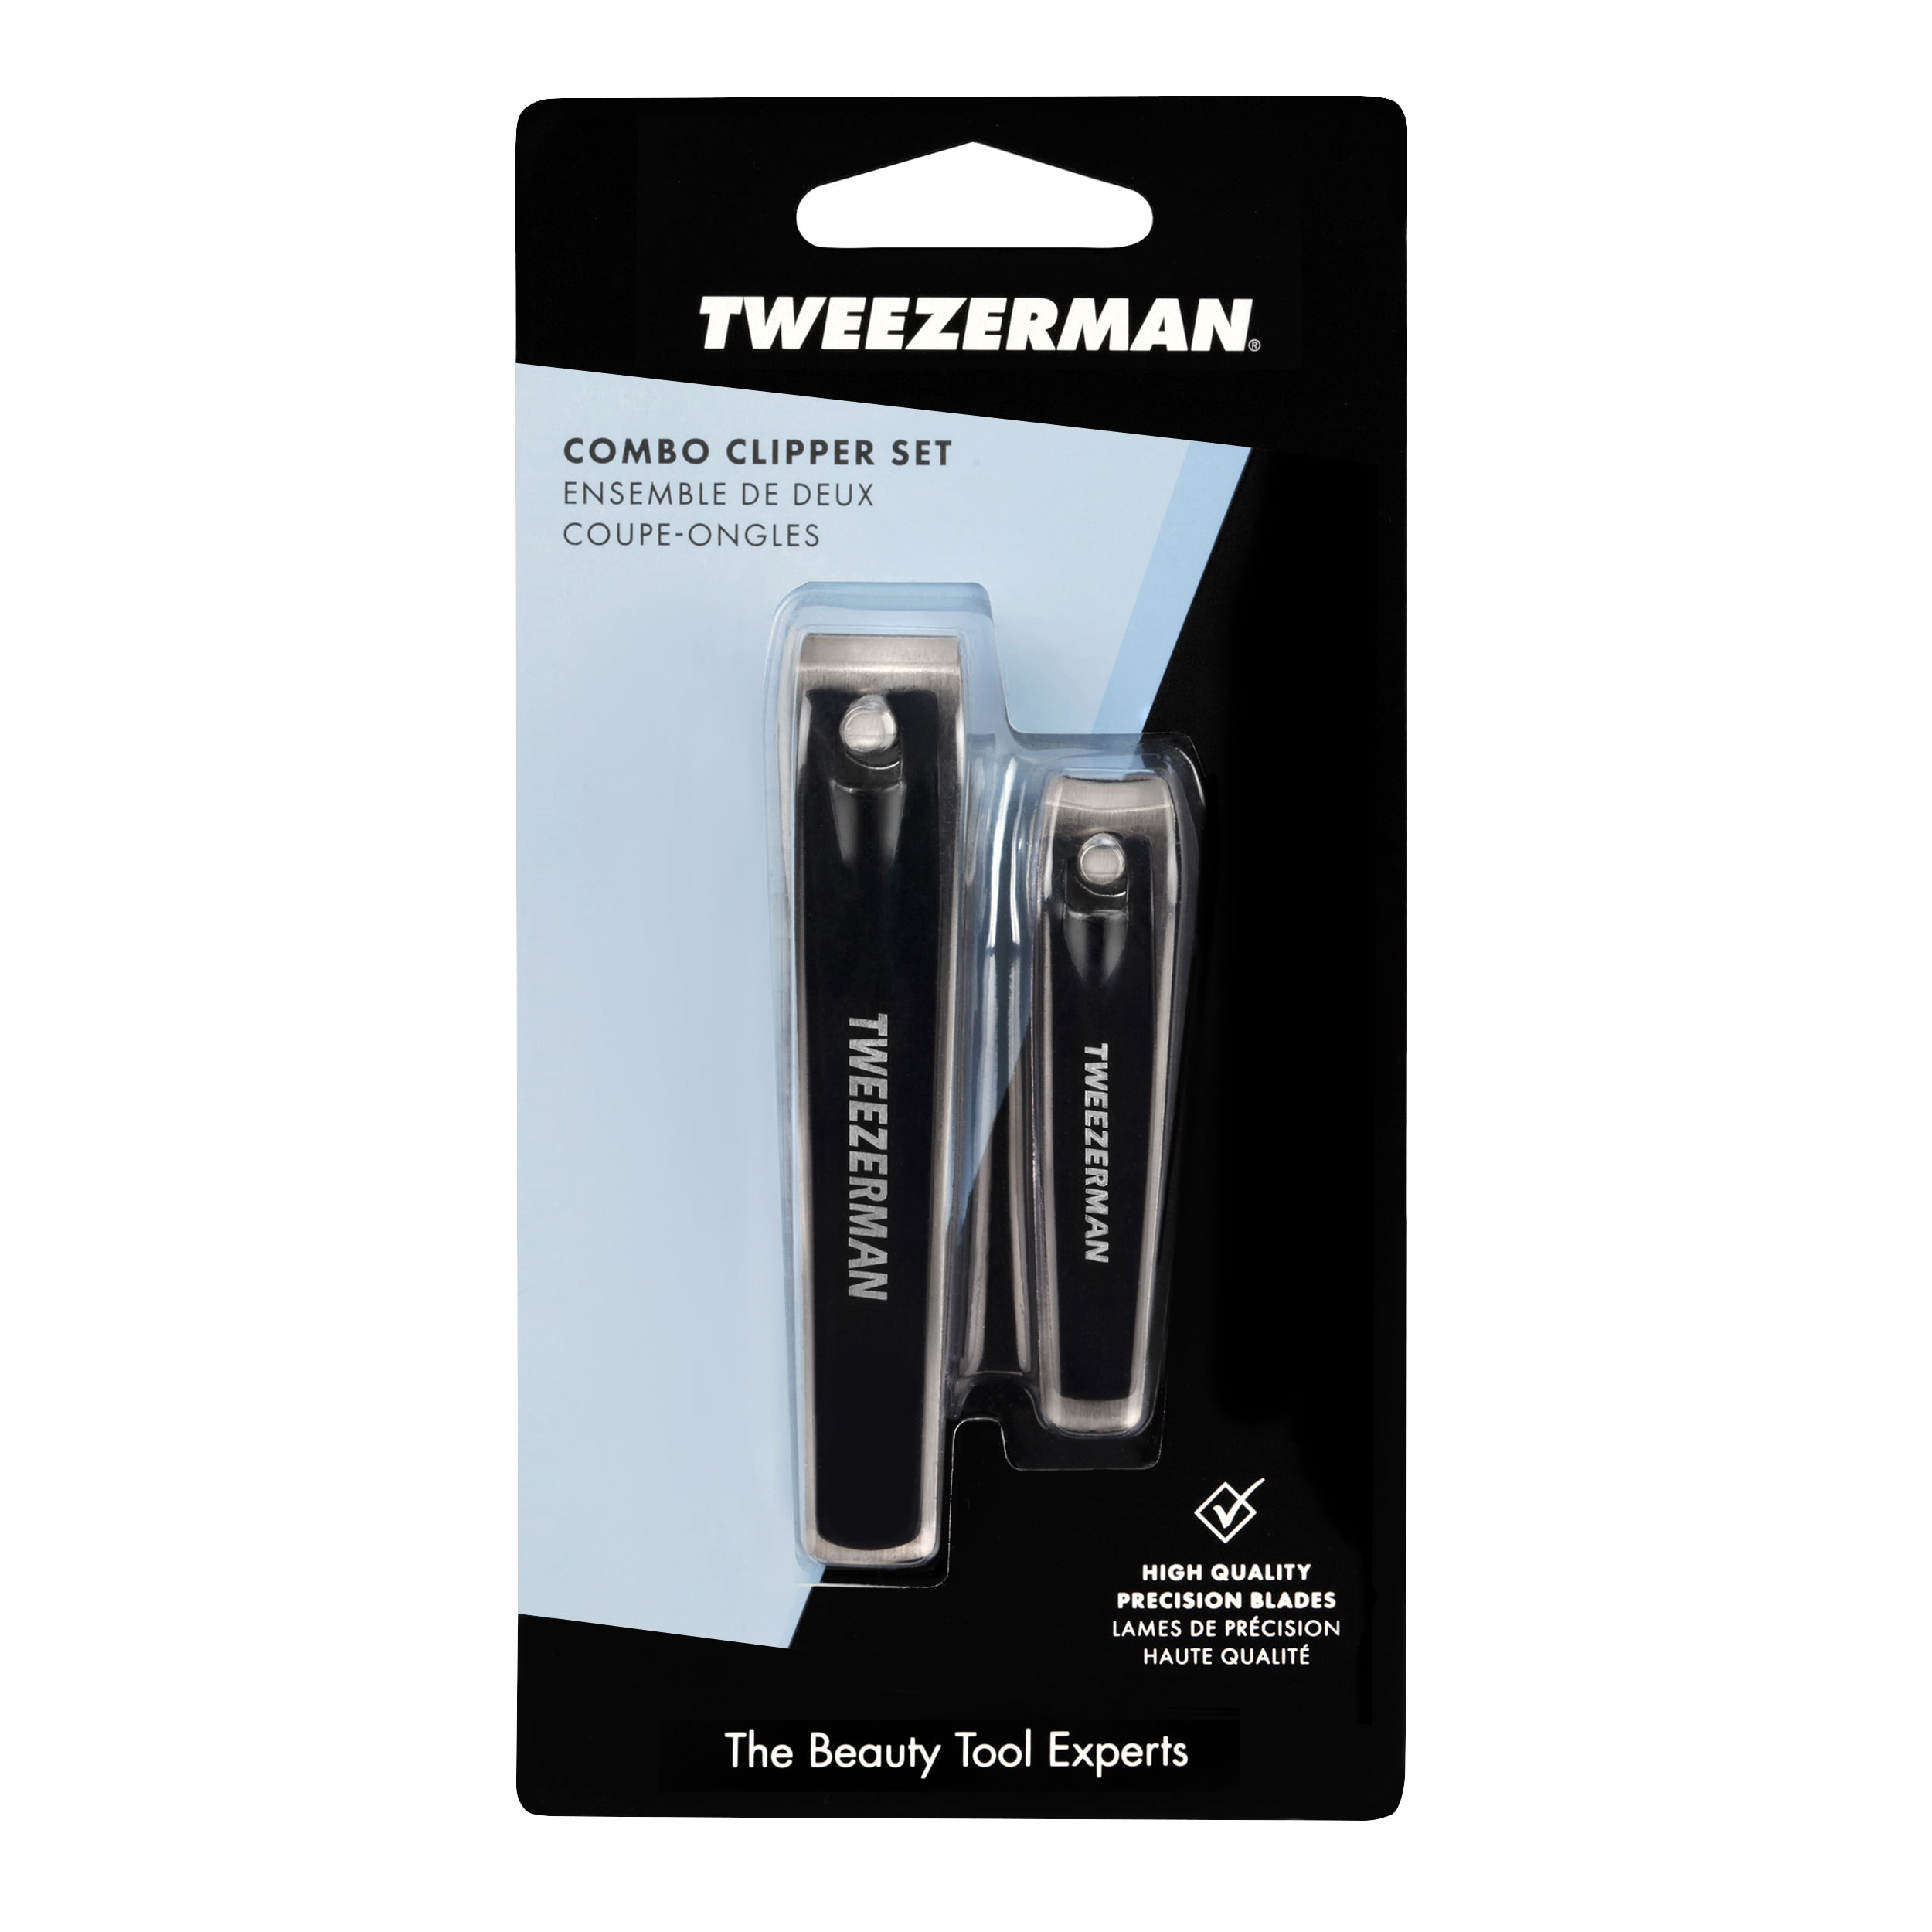 Tweezerman 2 Piece Stainless Steel Nail Clipper Set for Nail Care